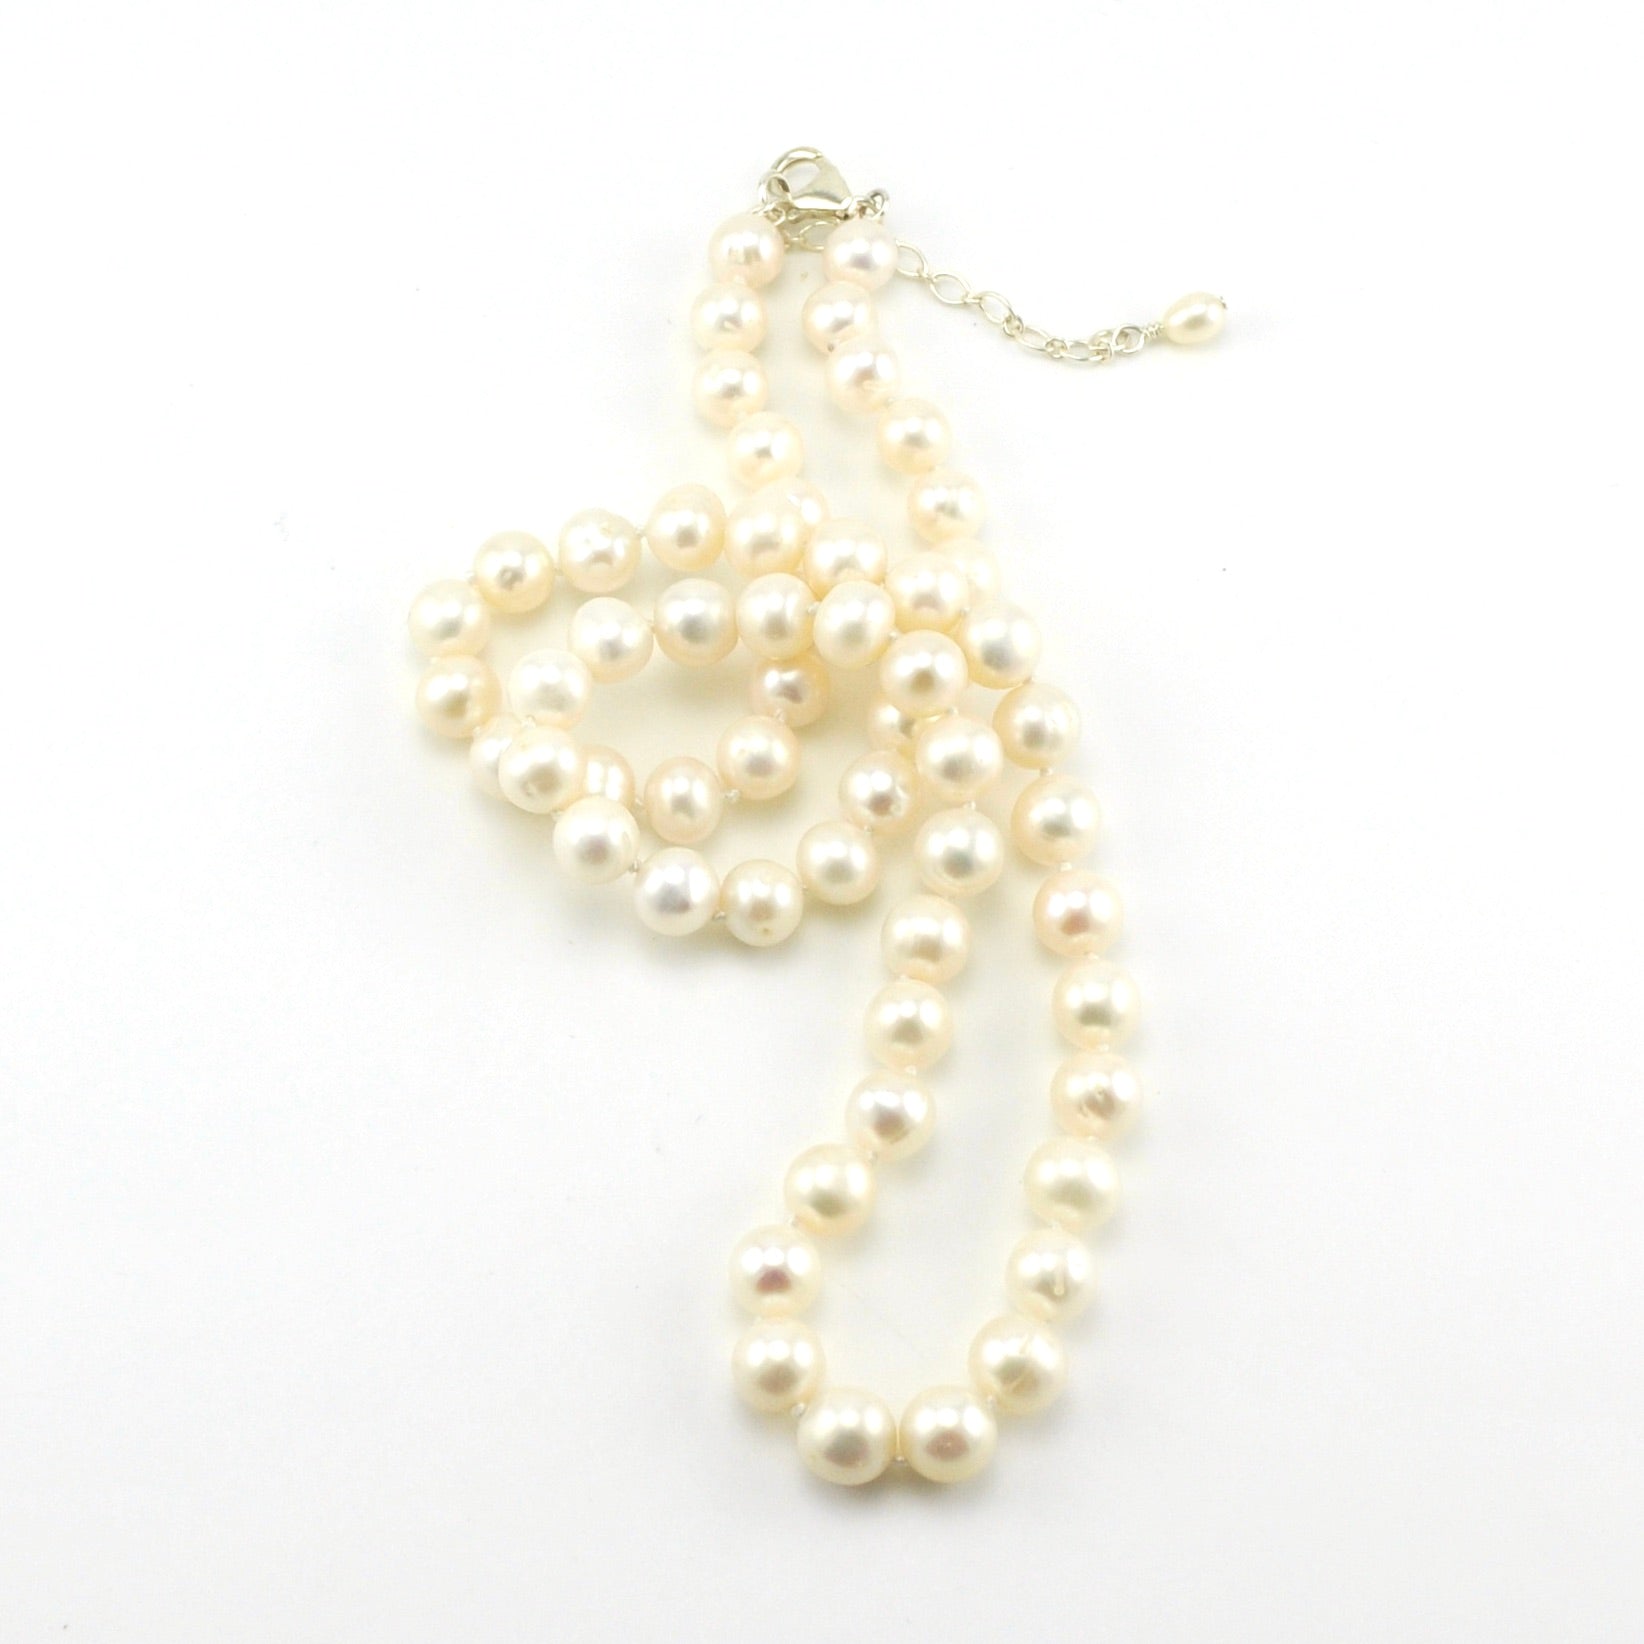 A classic 6-7 mm pearl necklace | beautiful pearls | ilovemypearls SALE